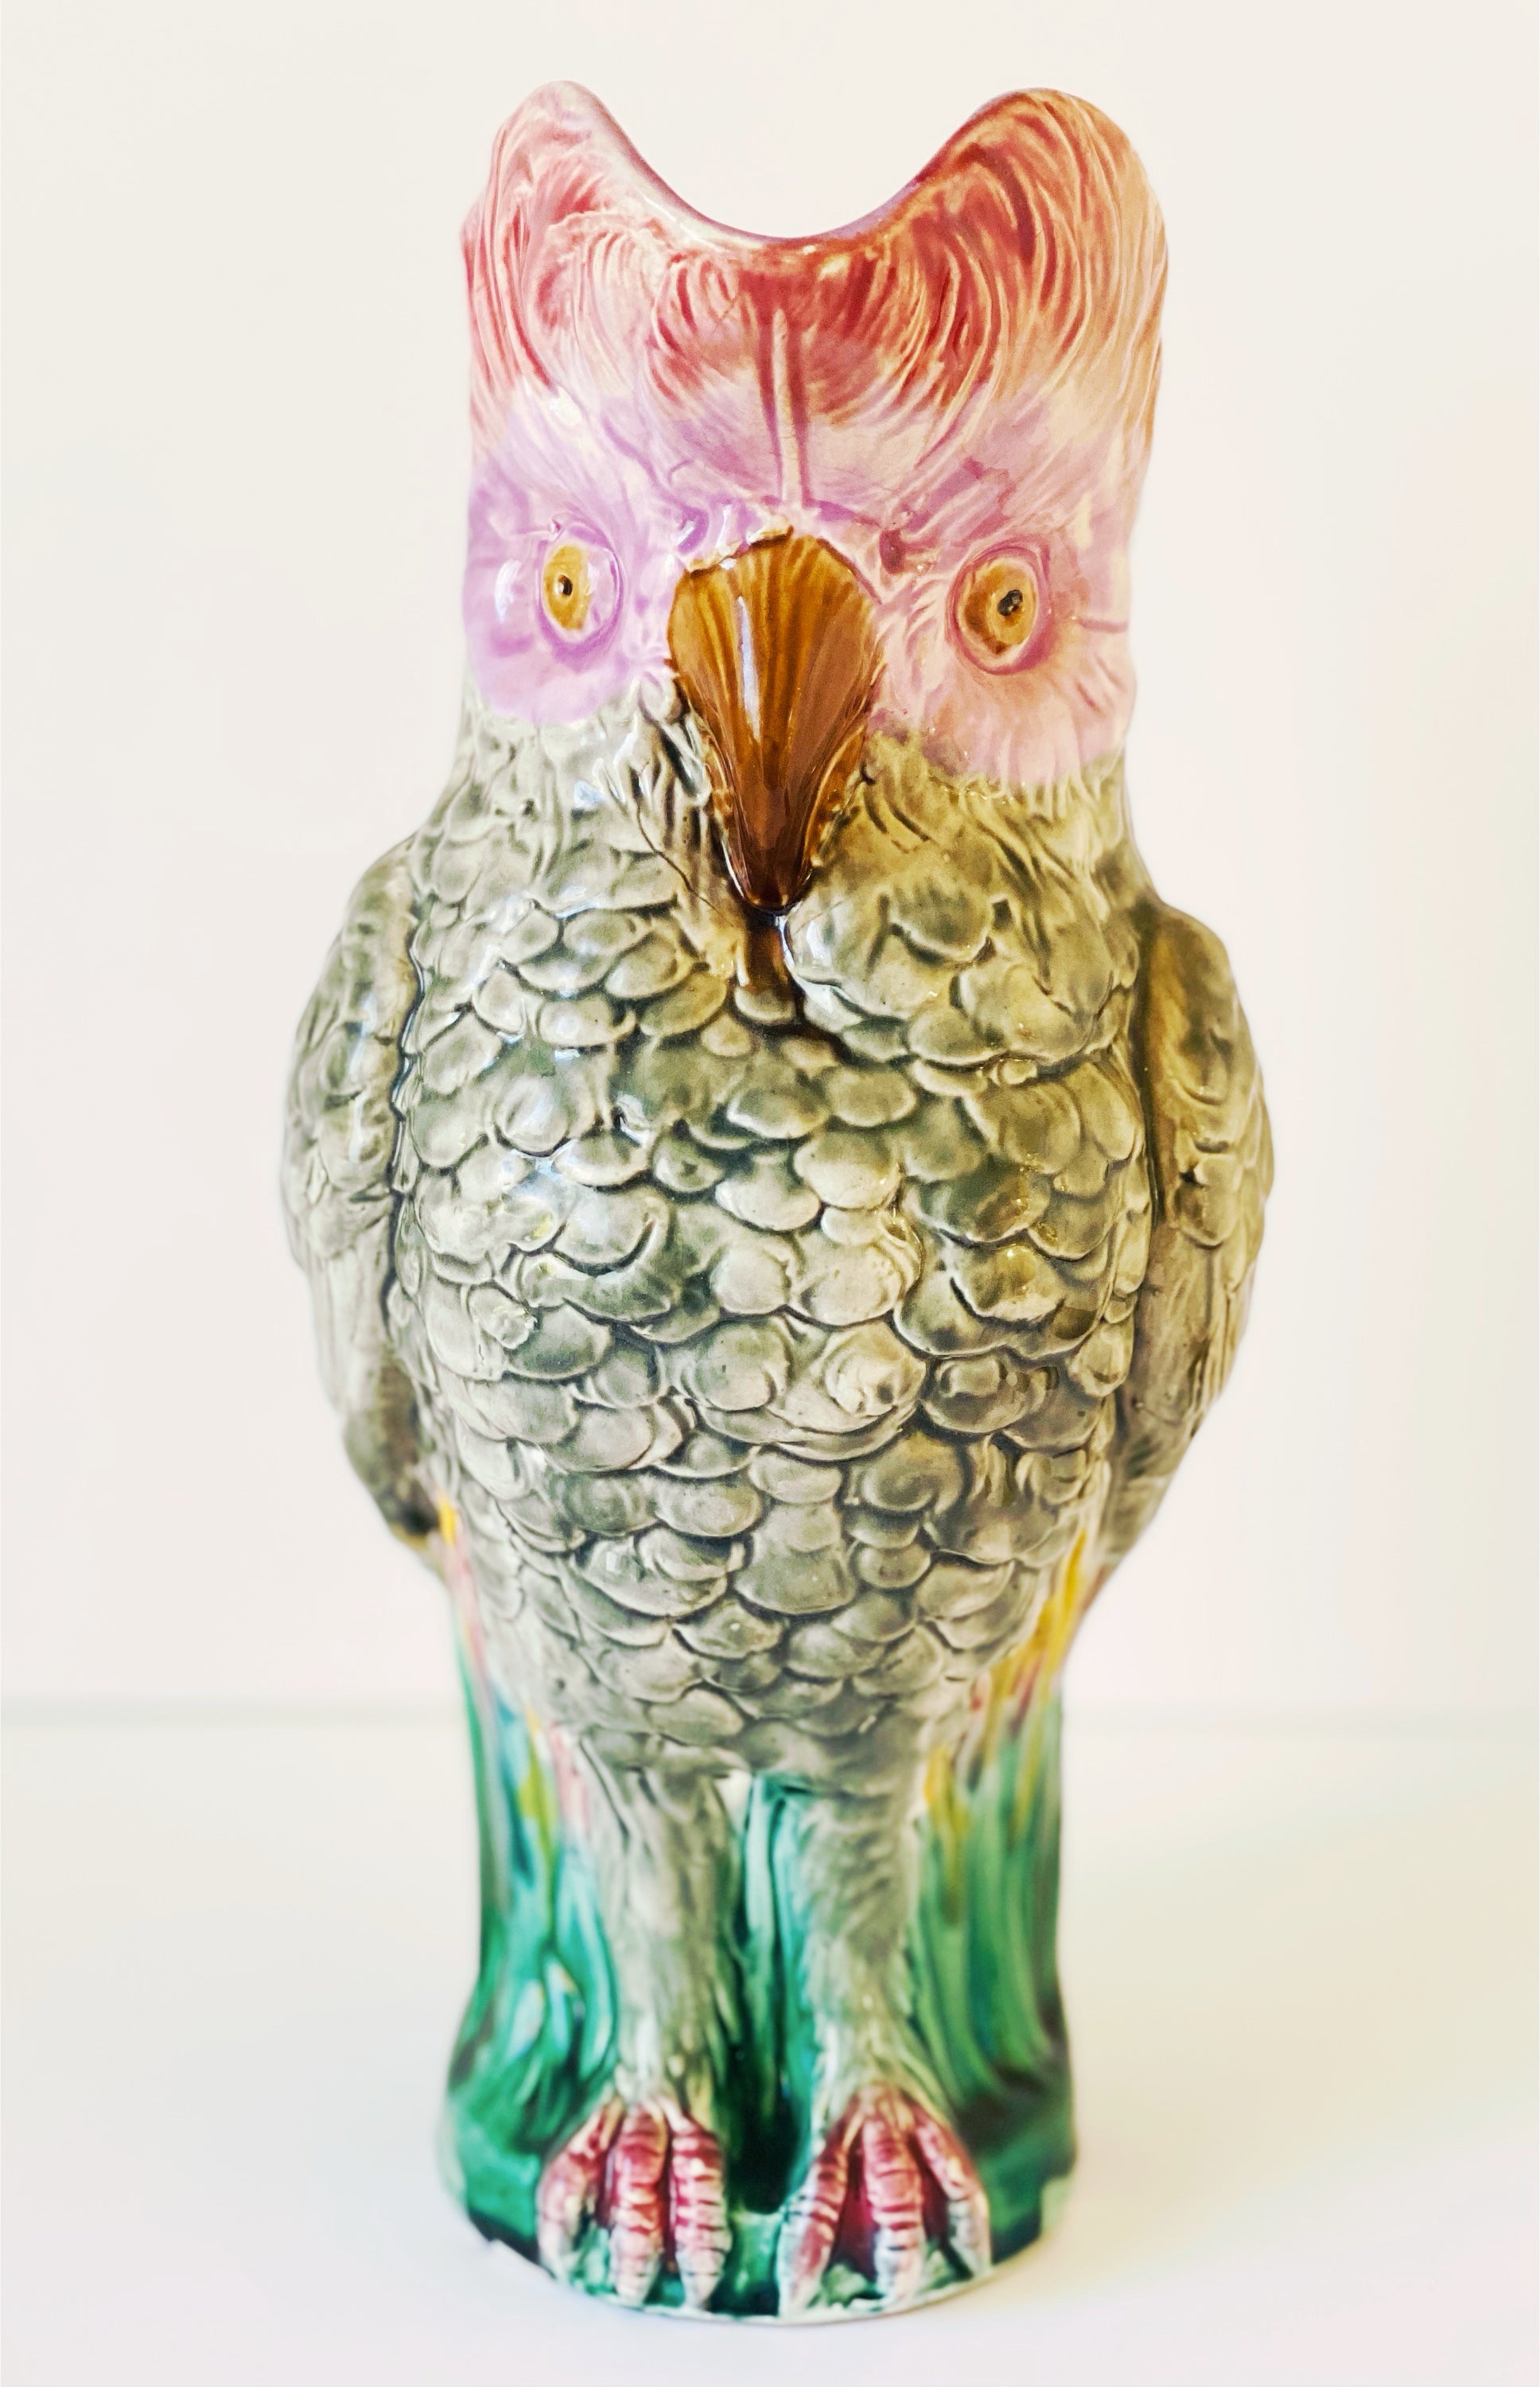 English Majolica Pitcher in Form of a Cockatoo